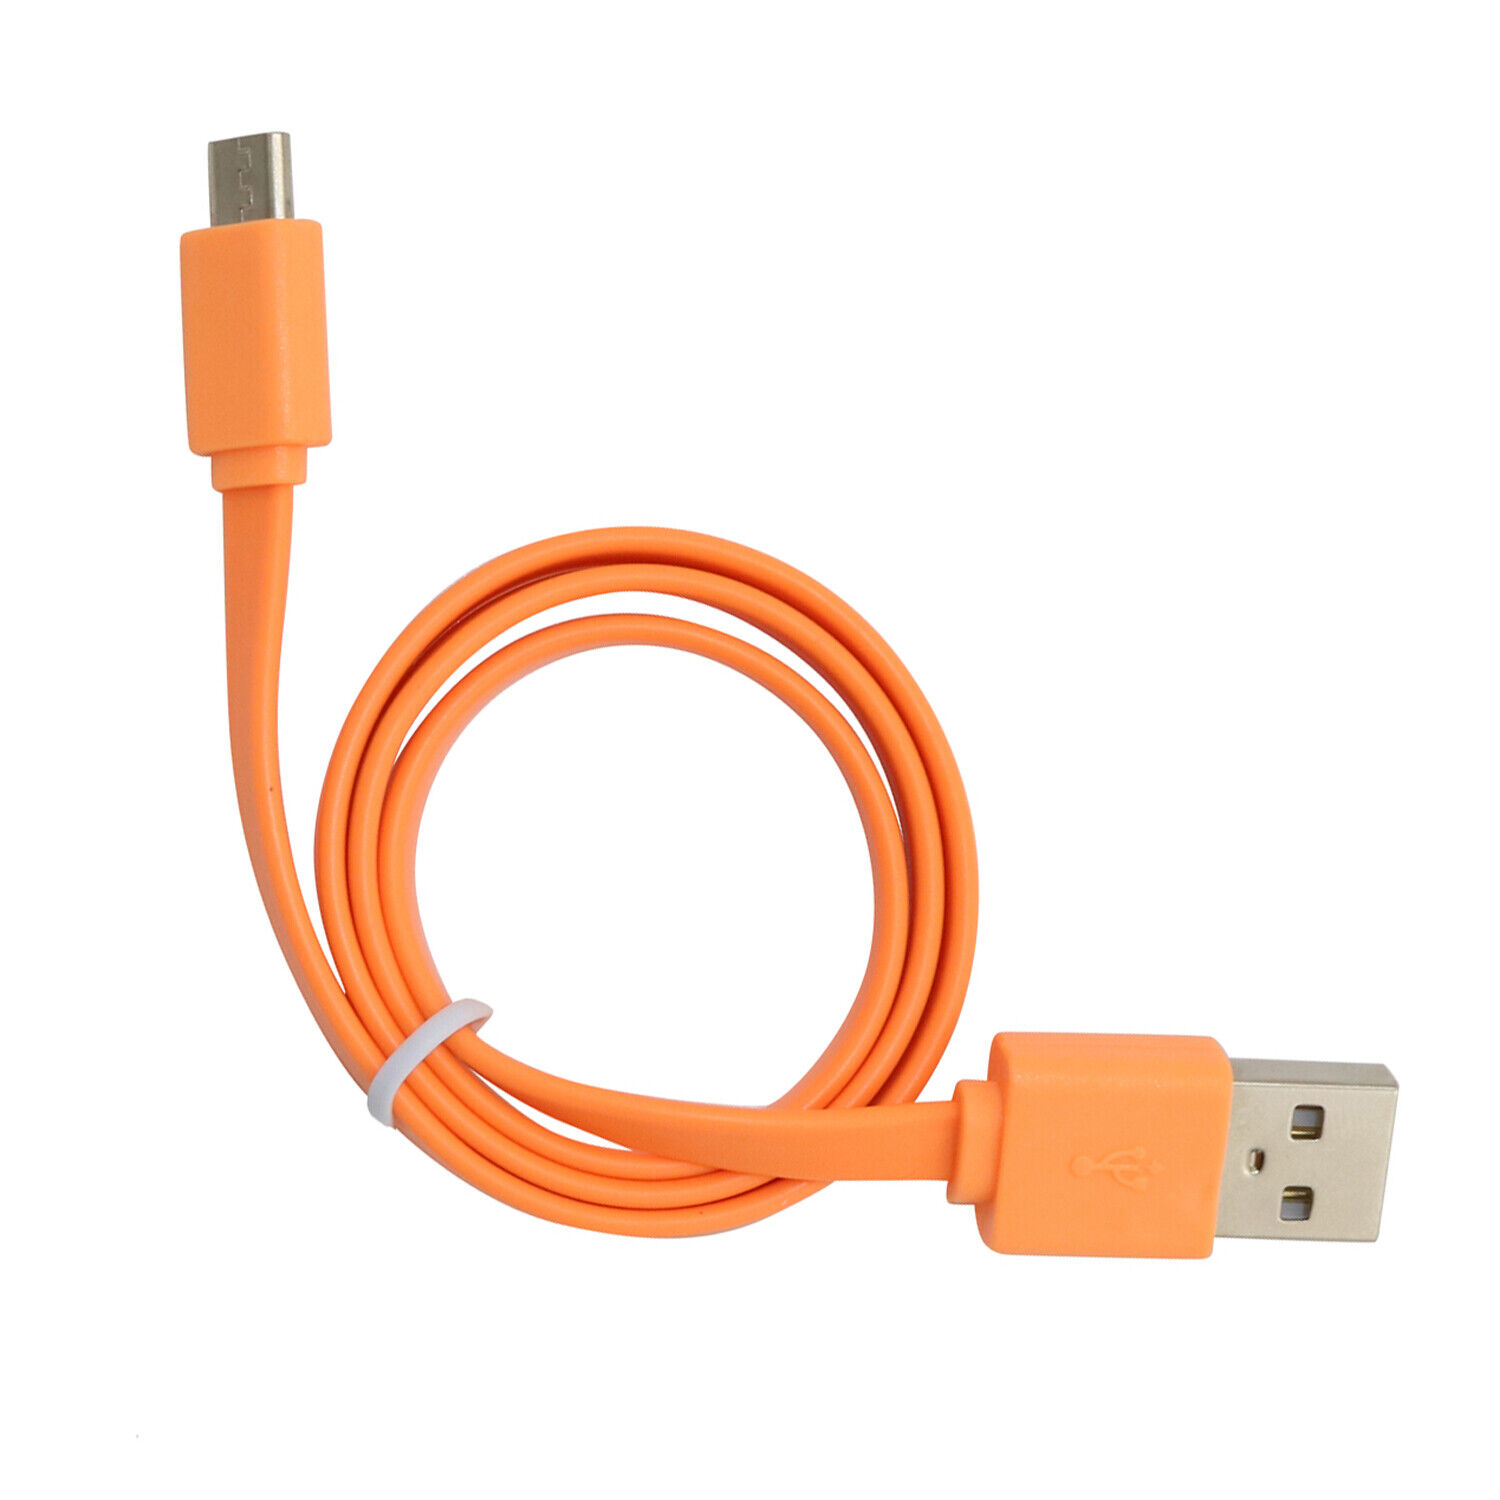 USB Charger Cable Cord for JBL Flip 4 3 2 Bluetooth Speaker Orange USB Charger Cable Cord for JBL Flip 4 3 2 Bluetooth - Click Image to Close